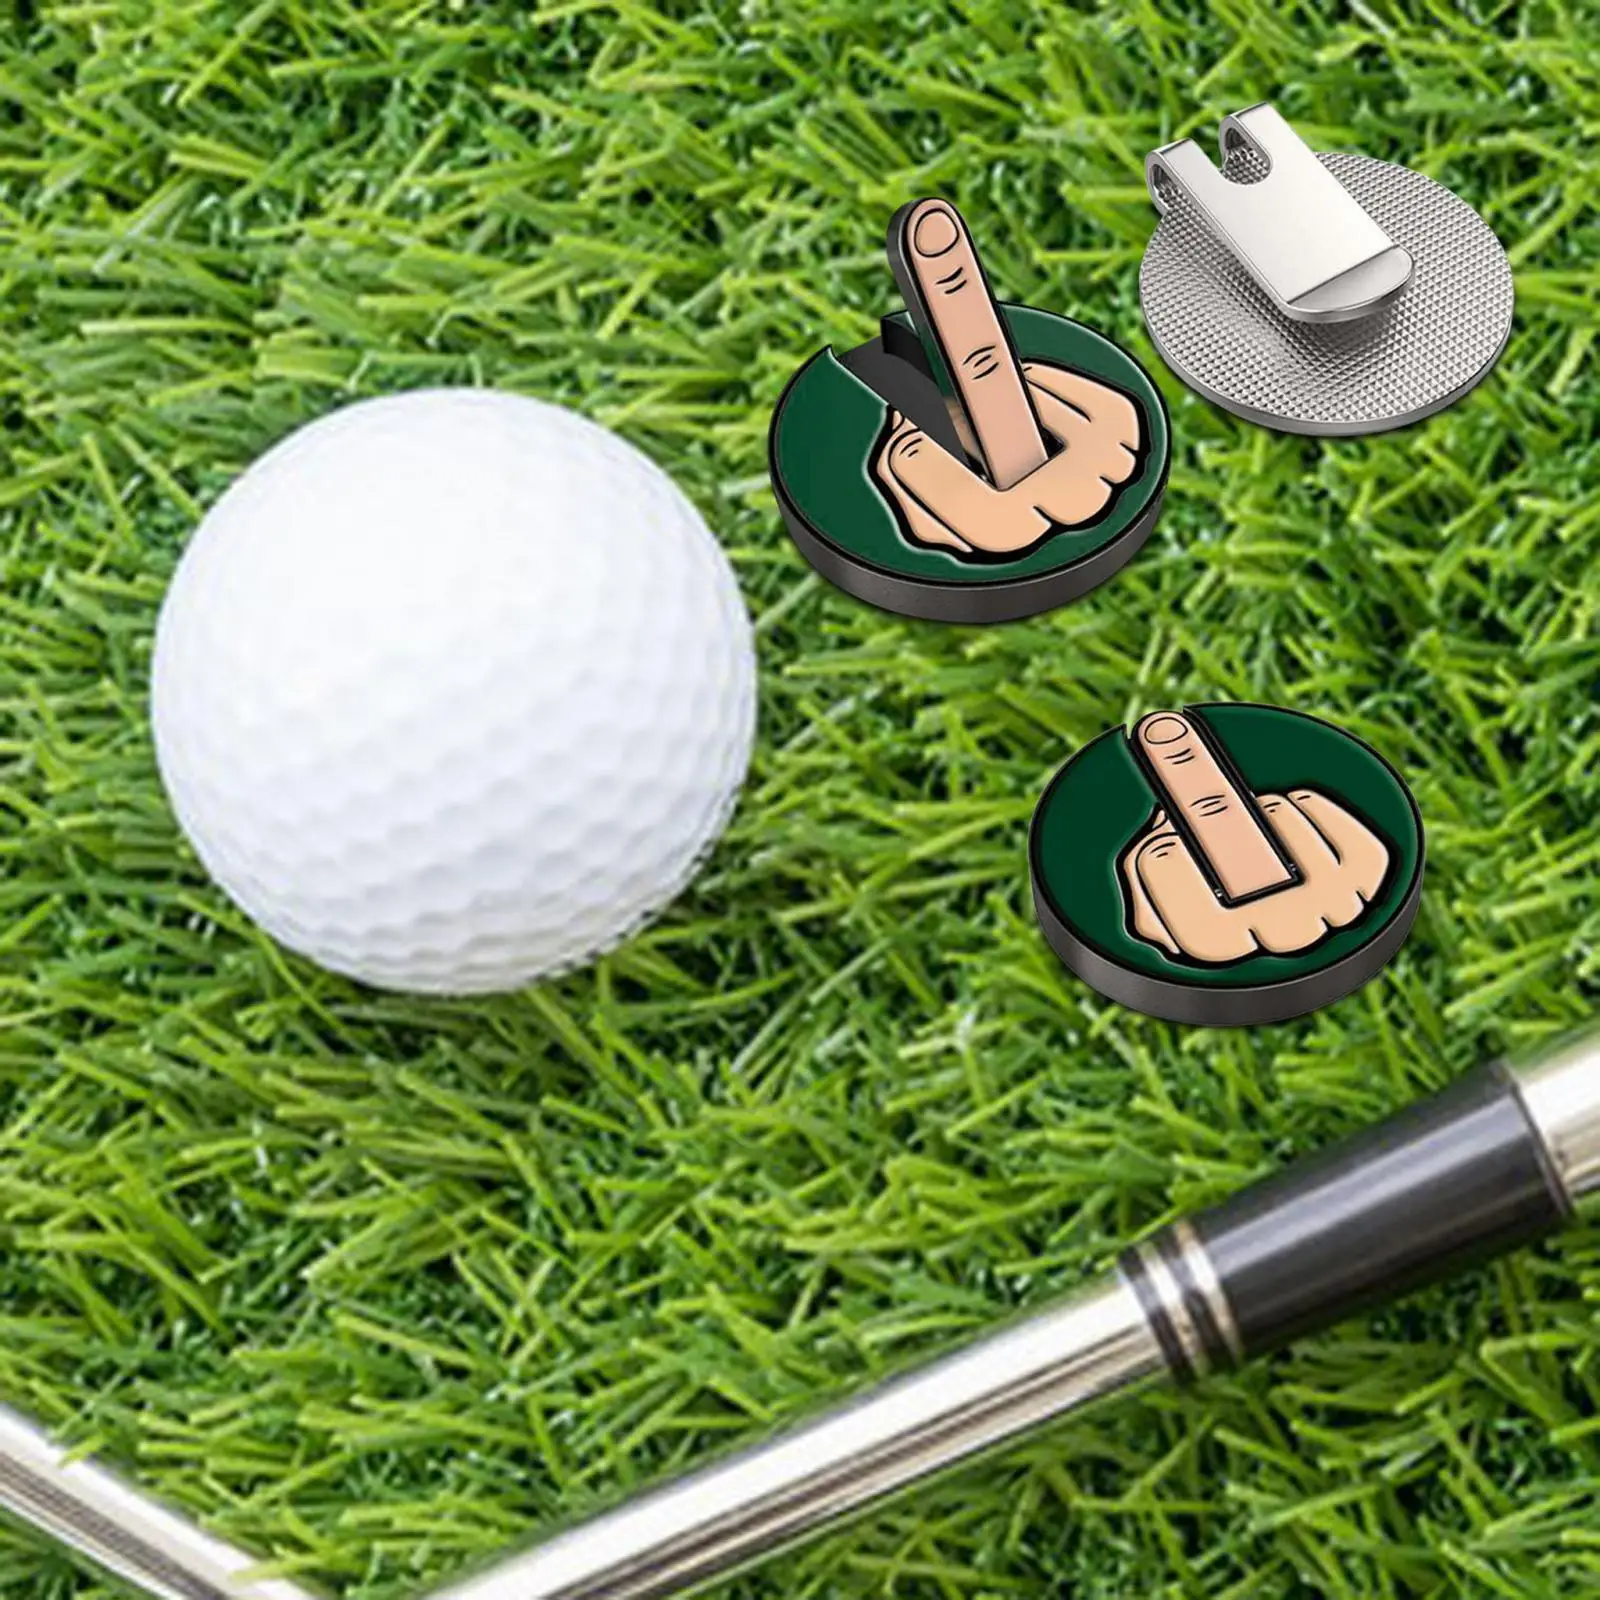 Middle Finger Theme Golf Ball Marker Lovers Iron Gifts Diameter 1inch Golfer